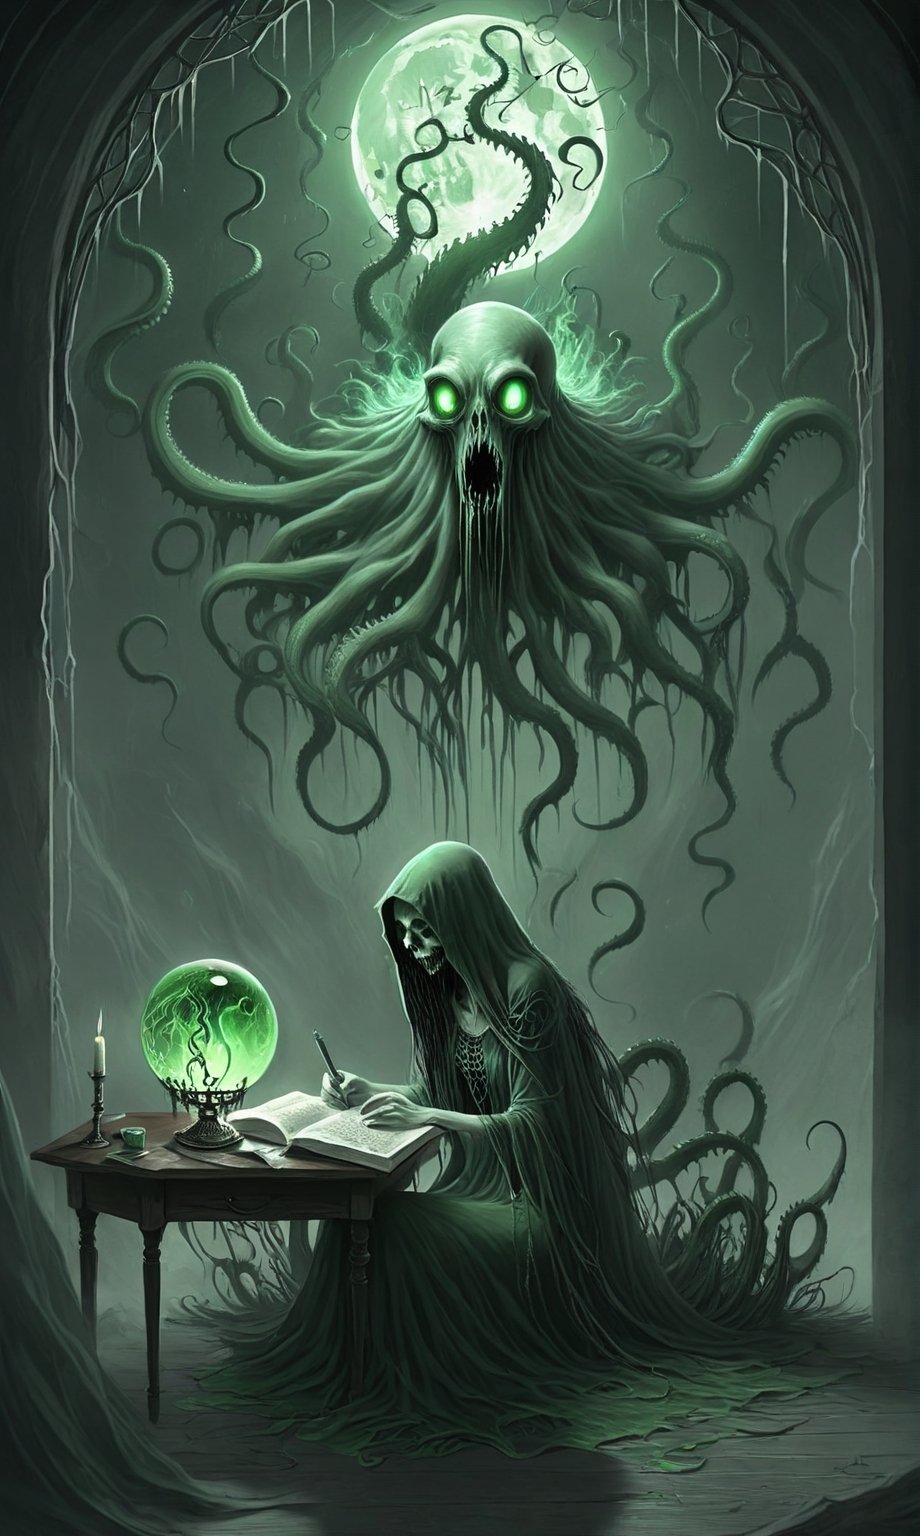 ((A thin wispy sad ghoul girl sitting at a desk)), she is studying book, (((an image of an eldritch tentacle monster appears in the crystal ball sitting on the table))),1 tall drippy candle sits on the table,some green skeletal ghosts hover in the background, a thin crescent moon shines through a broken window,(spiderwebs),donmcr33pyn1ghtm4r3xl  